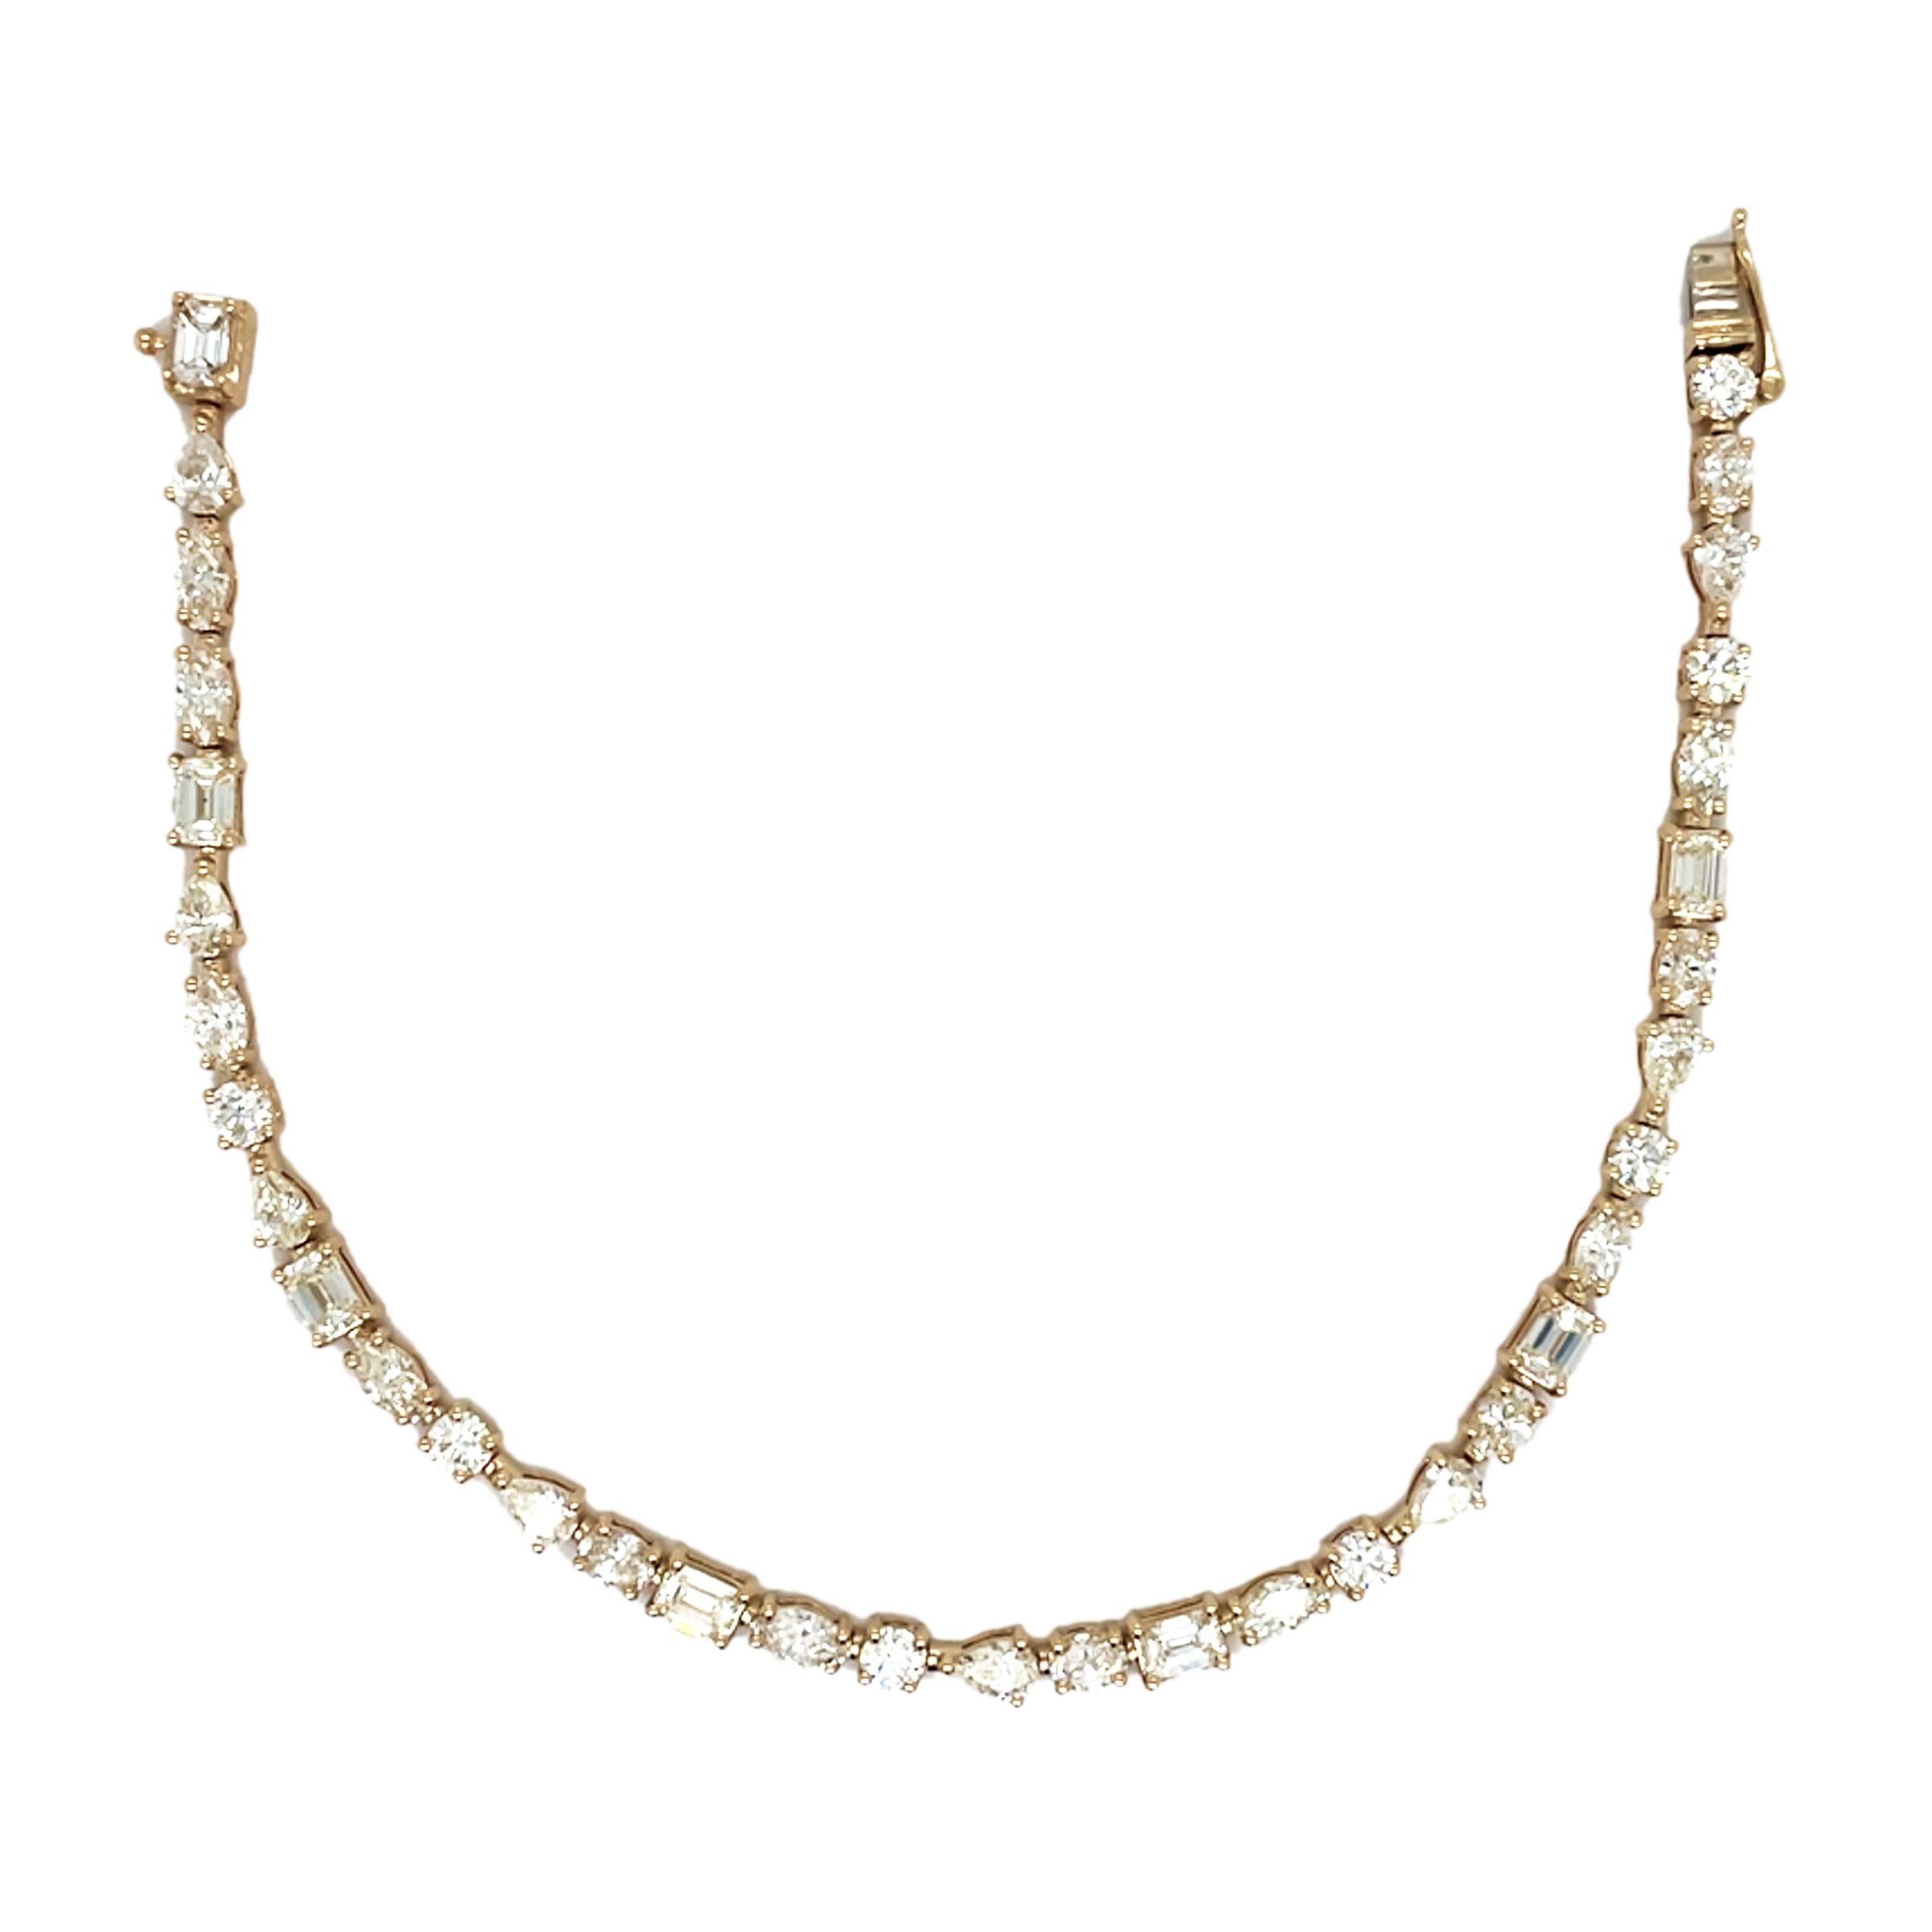 Quality Bracelet: Crafted of 14k yellow gold this bracelet features 35 Natural Fancy Shape Diamonds, Fancy Shape Diamonds weighing 5.68 carats. Hinged Clasp Closure. 7 Inches in length.
 Surprise Your Loved Ones with Our Fancy Shape Diamond Bracelet